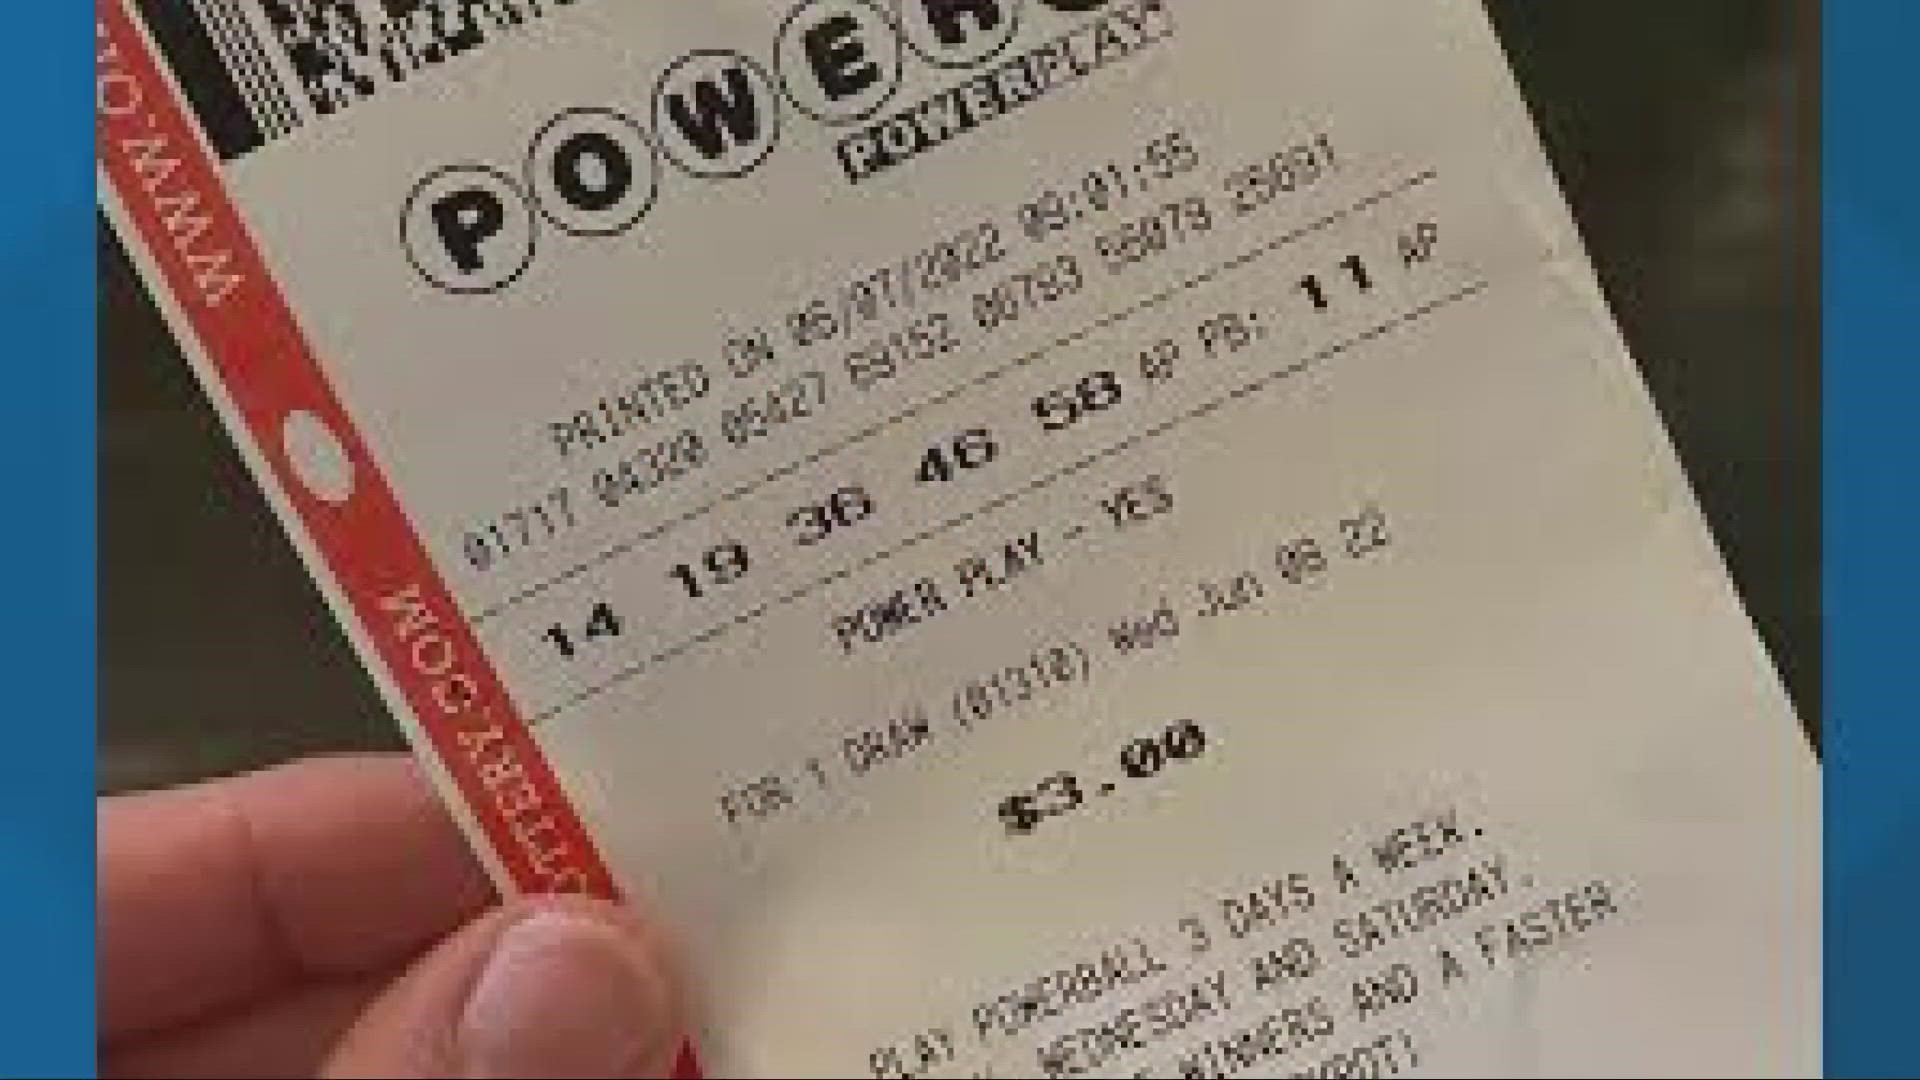 Feeling lucky? Get your lottery tickets! The Powerball jackpot has grown to $700 million for the next drawing on Saturday, February 4, 2023.